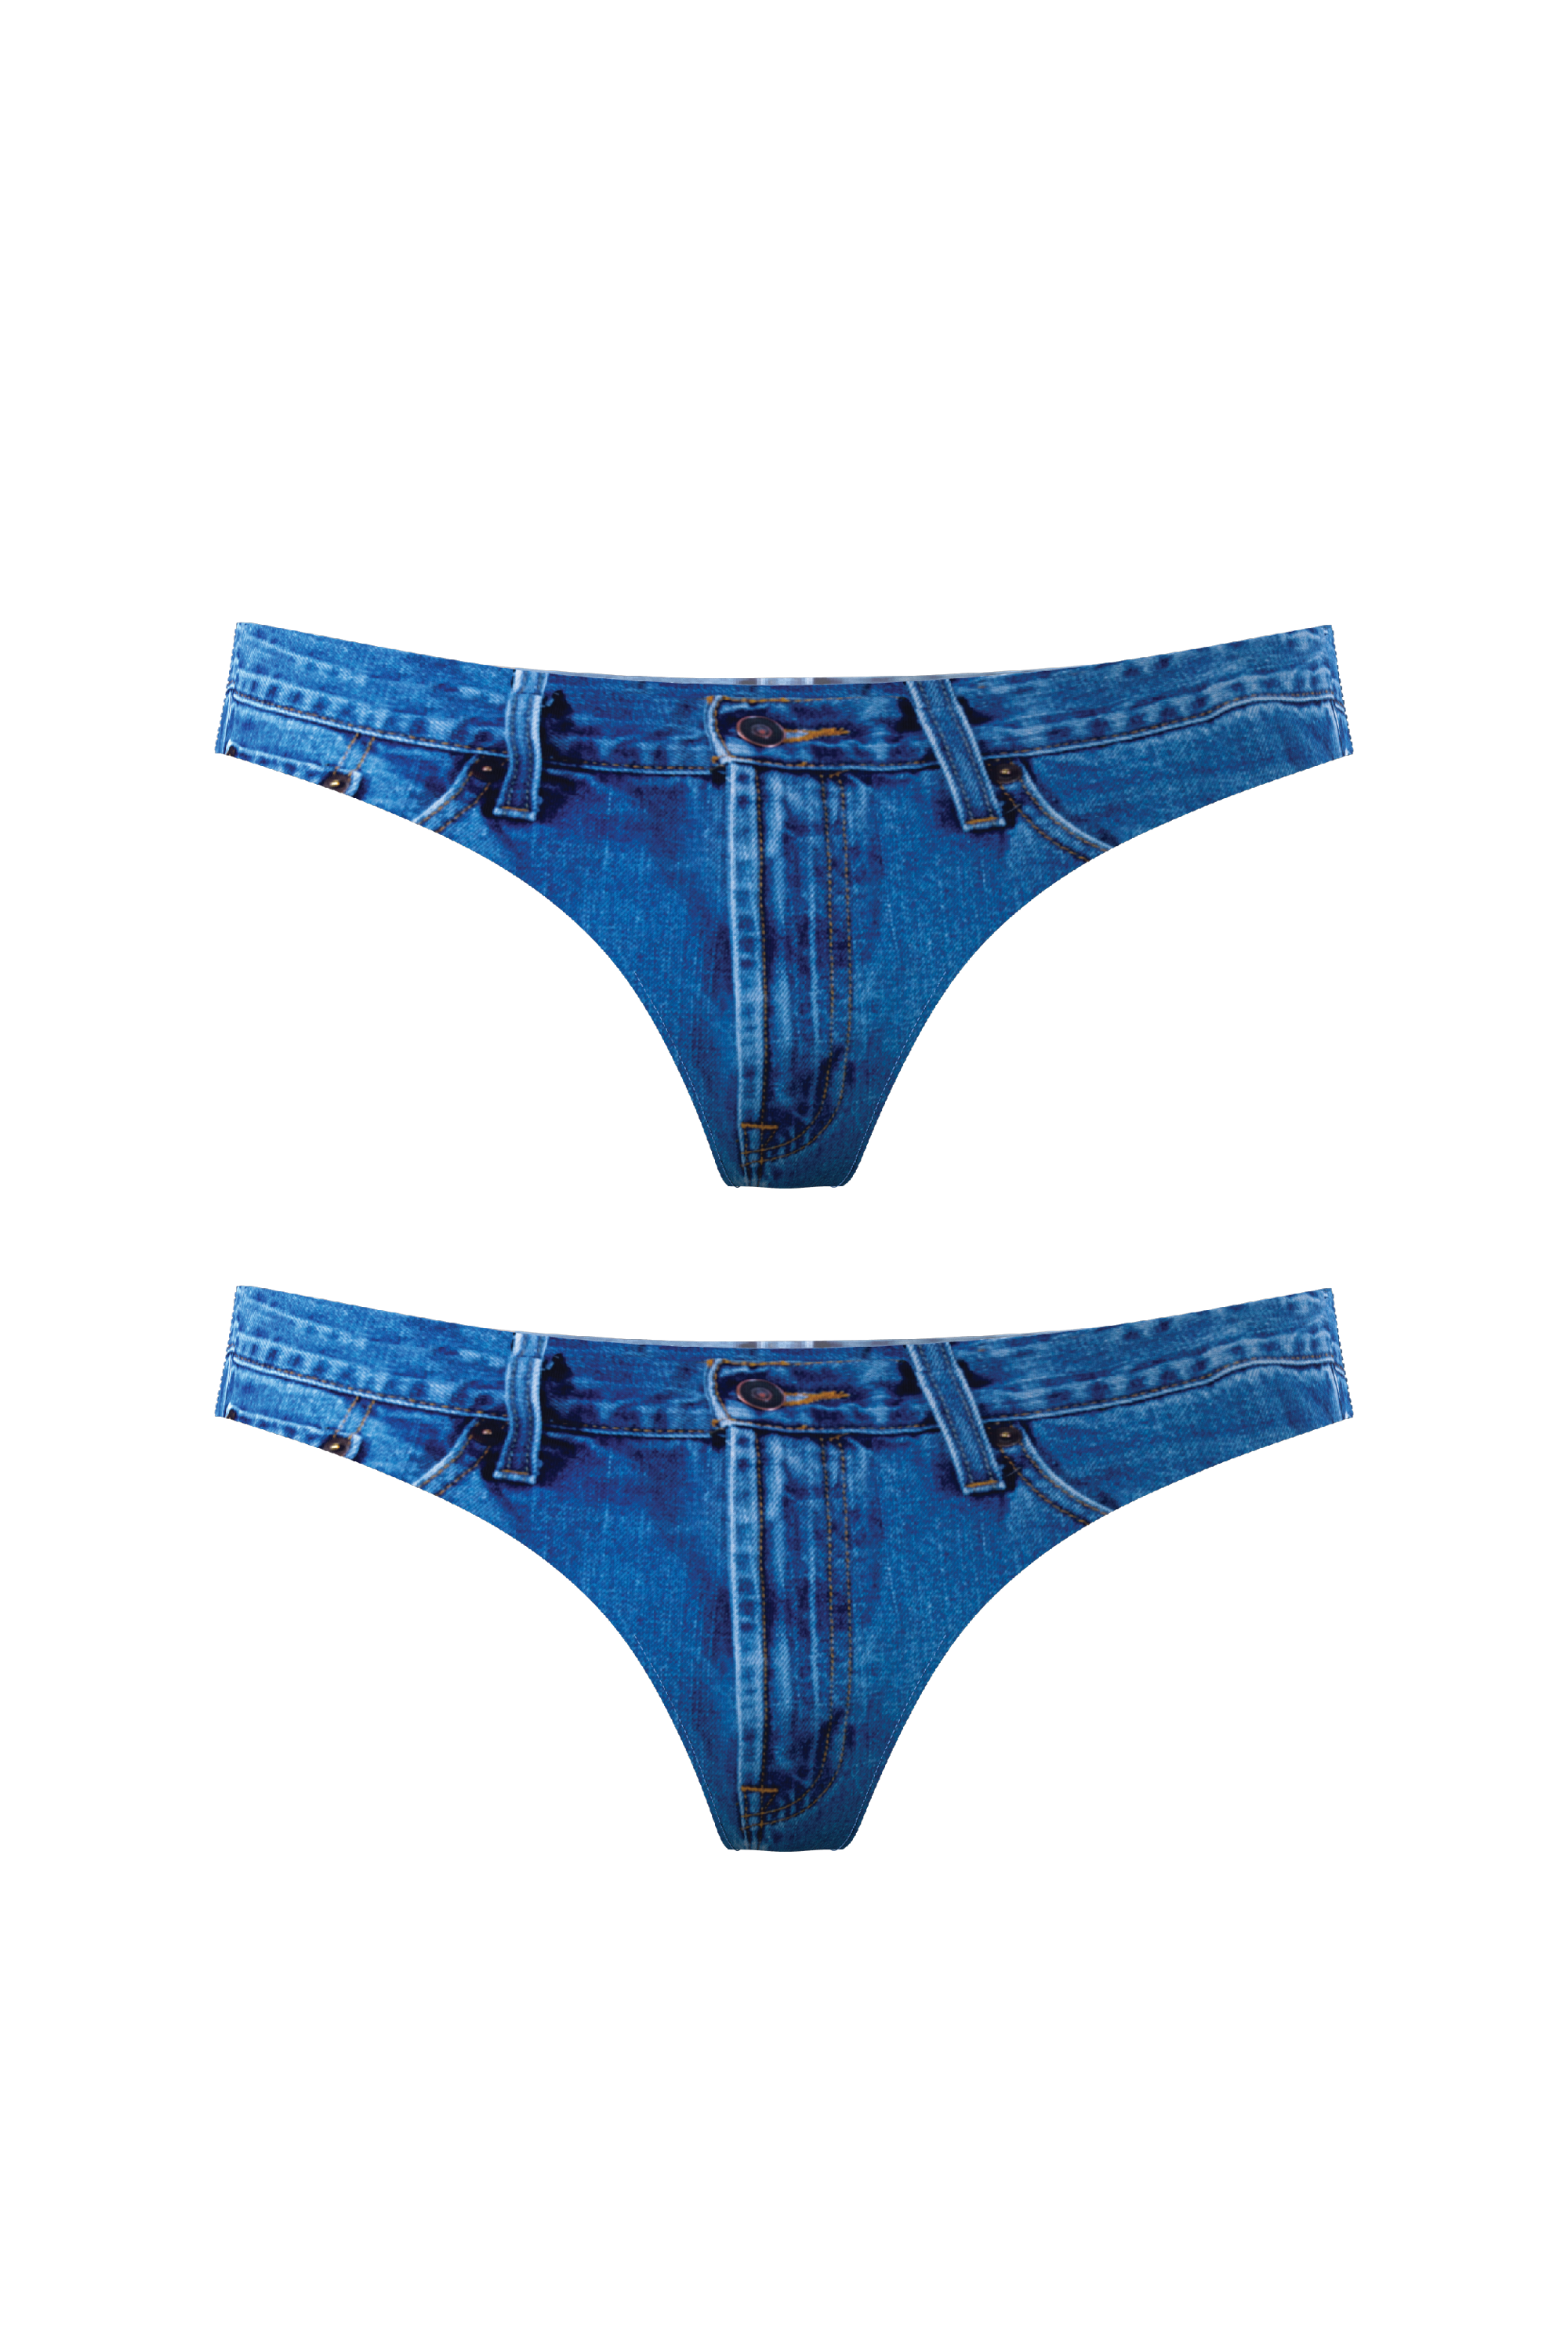 Couples Matching Underwear Sets – Celestial Red Shop